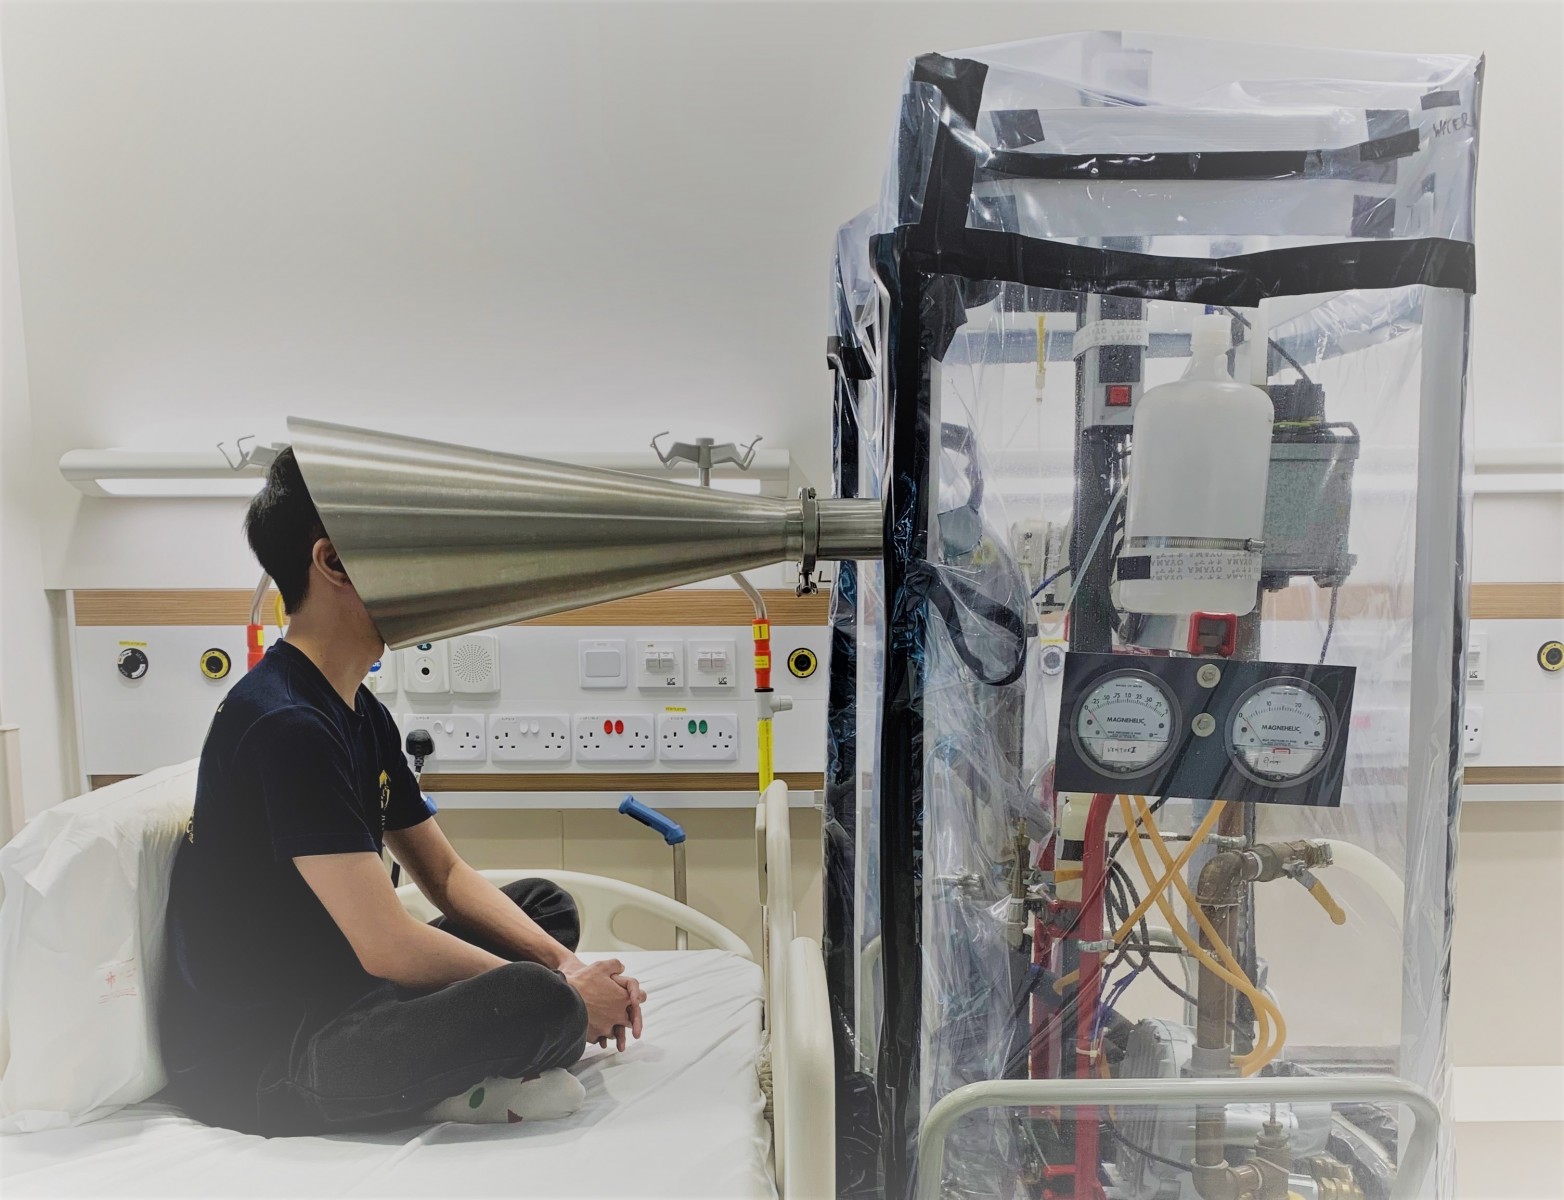 NUS researcher Mr Douglas Tay in a hospital room at the NCID demonstrating how the Gesundheit II exhalation collection equipment is used.